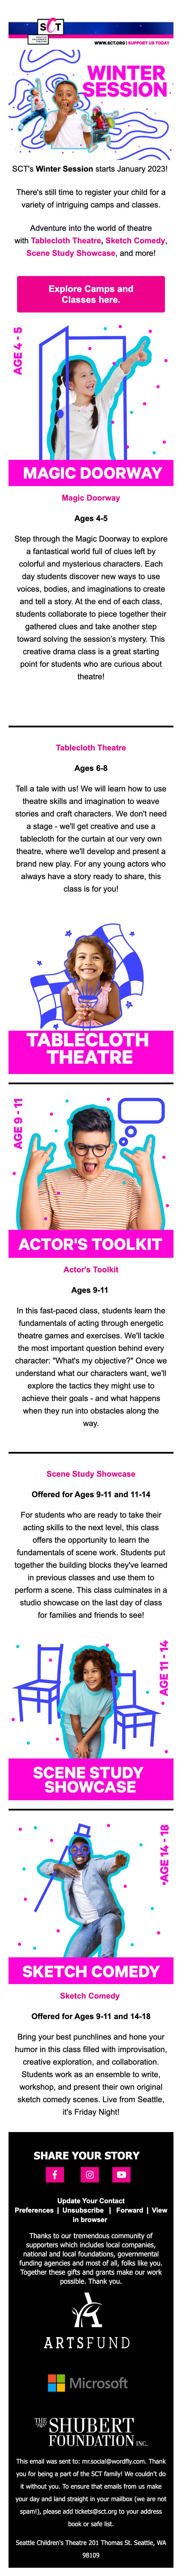 ❄️ Winter Classes start soon! Actor's Toolkit, Scene Study Showcase, Sketch Comedy and more! - mobile view